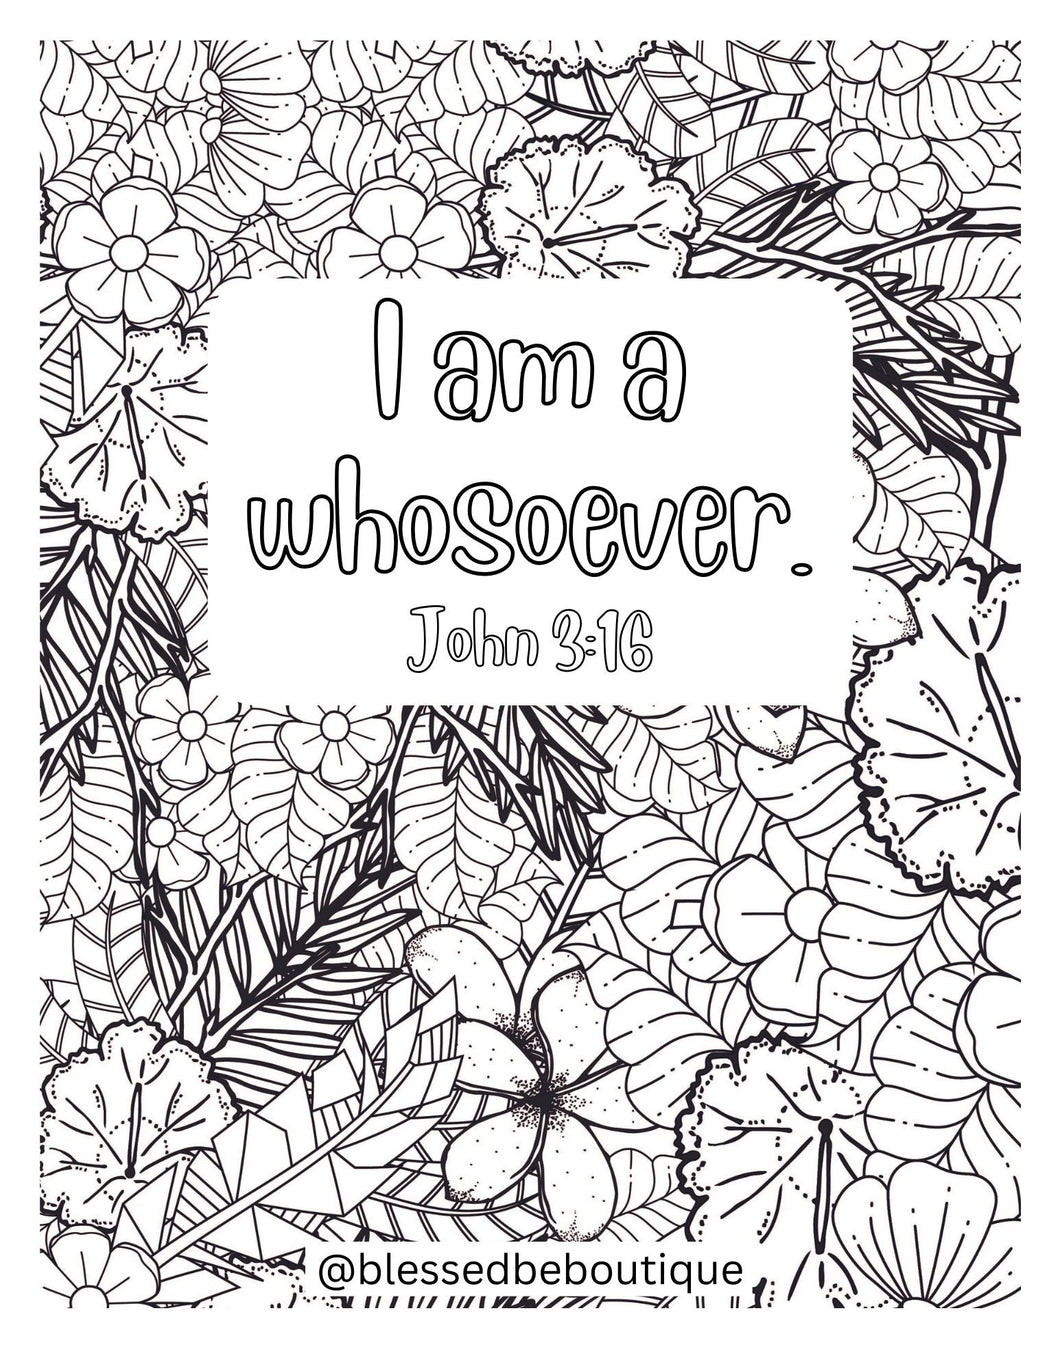 I am a whosoever - Blessed Be Boutique